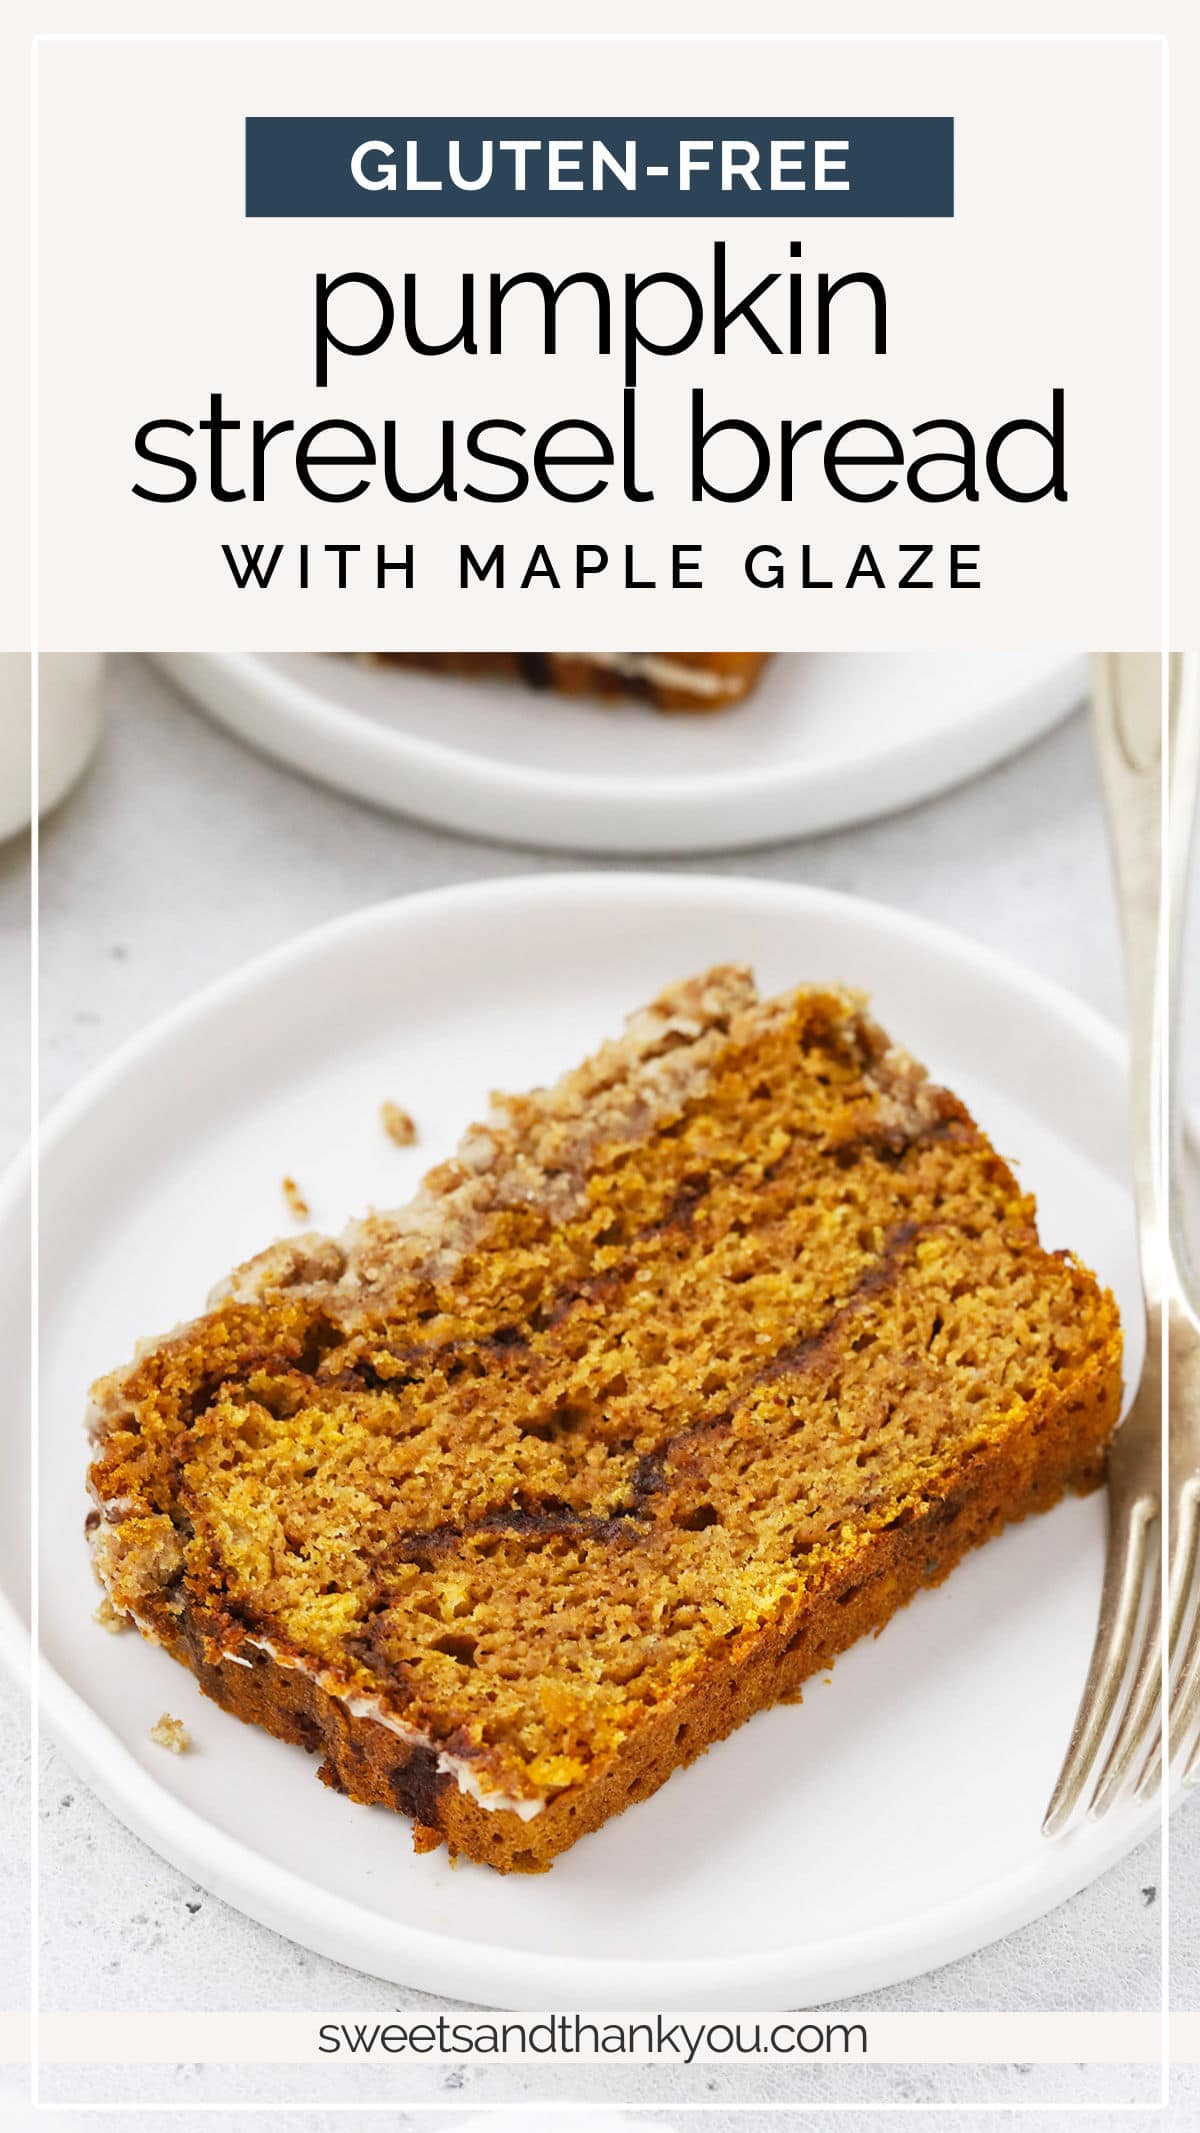 Gluten-Free Pumpkin Streusel Bread With Maple Glaze - This amazing gluten-free cinnamon swirl pumpkin bread is topped with a buttery crumble and sweet maple glaze. It's THE BEST gluten-free pumpkin bread recipe ever! // Cinnamon Swirl Pumpkin Bread Recipe // Maple Pumpkin Bread // Maple Glaze Pumpkin Bread // Glazed Pumpkin Bread // Gluten-Free Quick Bread #pumpkinbread #streusel #mapleglaze #glutenfreepumpkin #glutenfreebaking #glutenfreebread #glutenfreequickbread